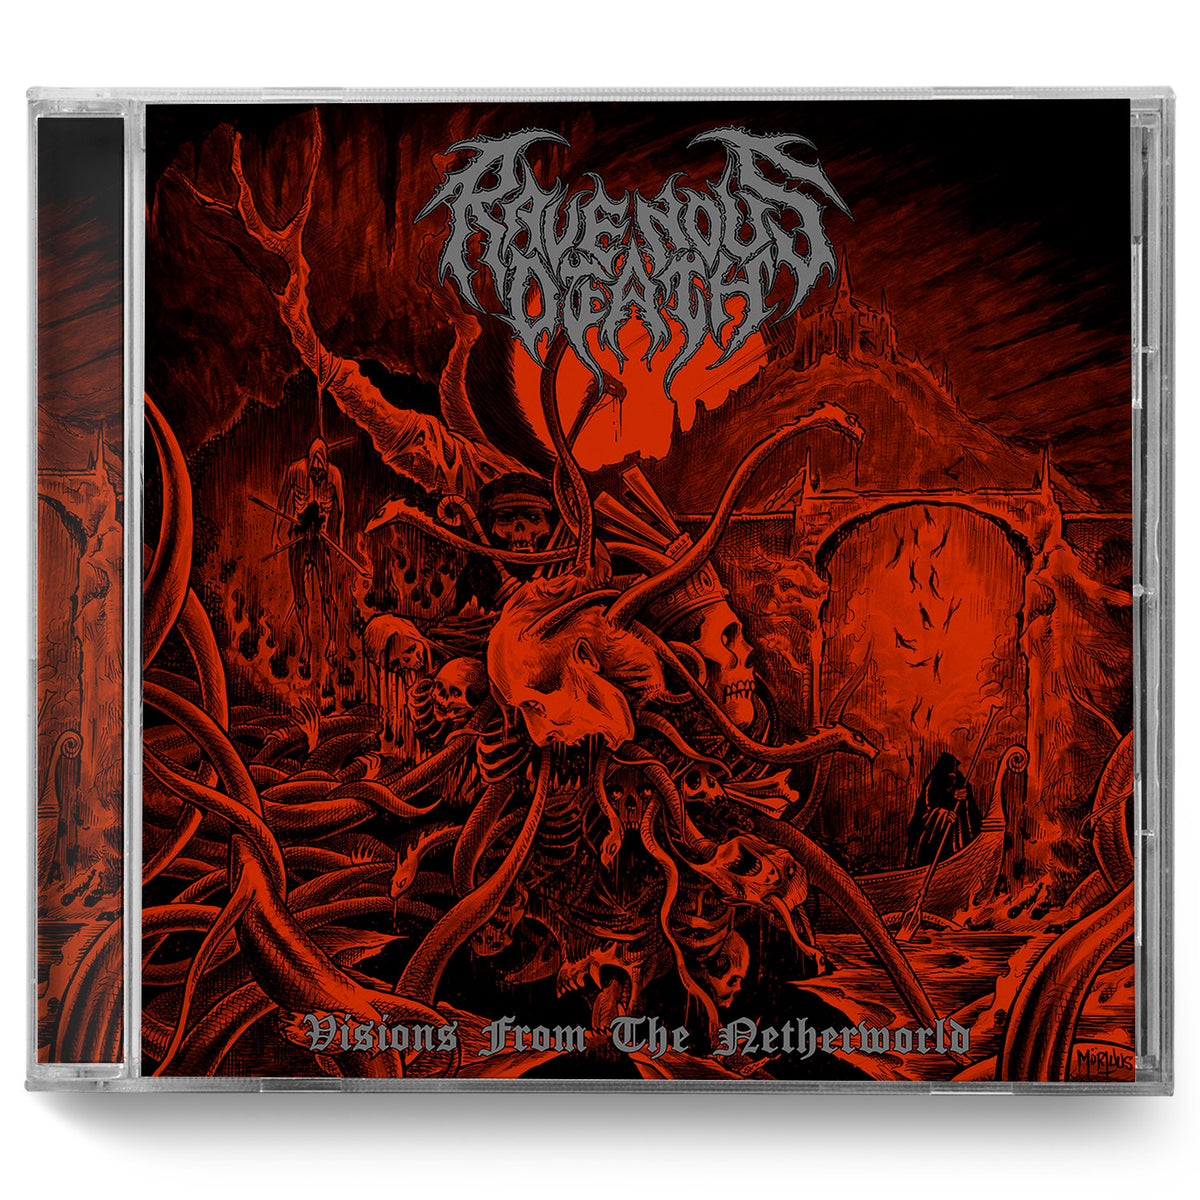 Ravenous Death "Visions from the Netherworld" CD